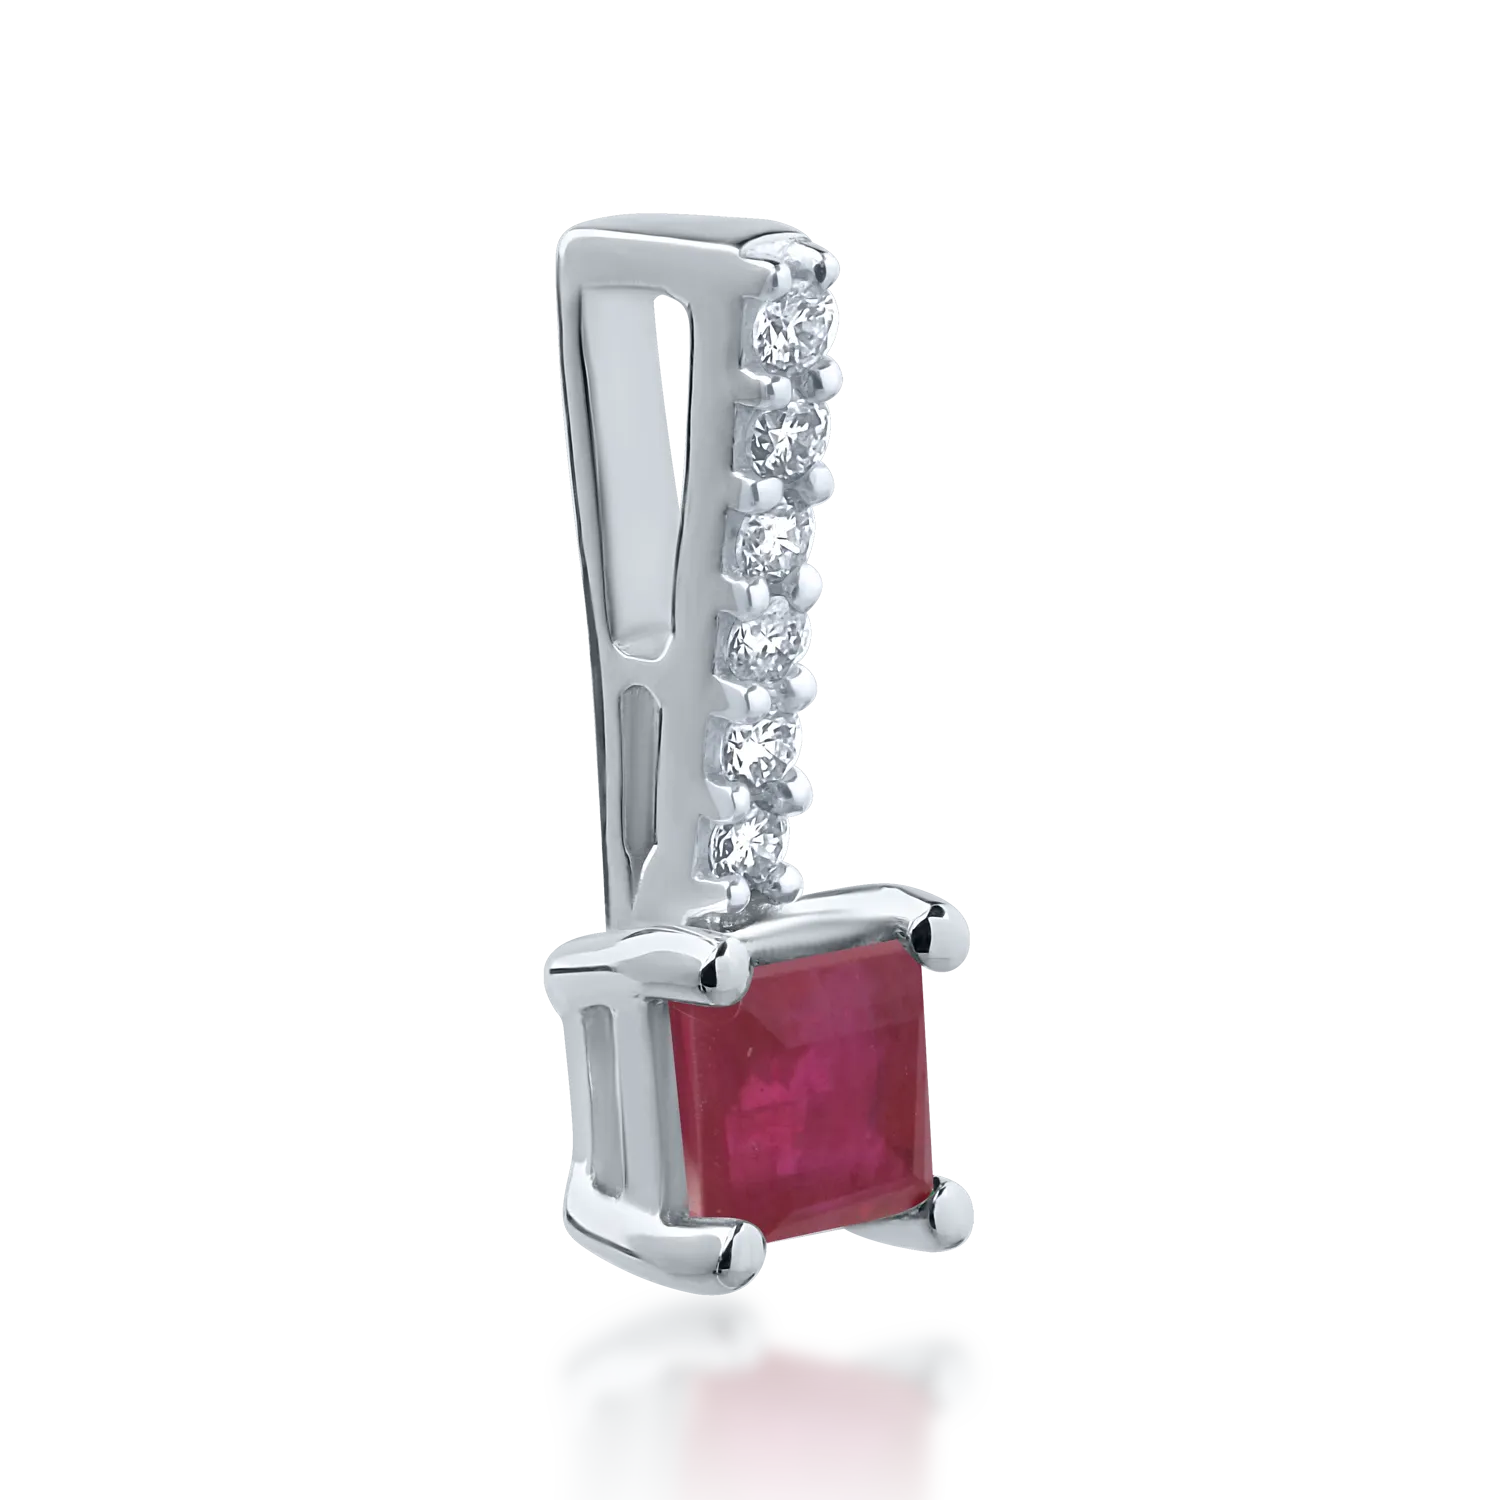 14K white gold pendant with a 0.182ct ruby and 0.03ct diamonds